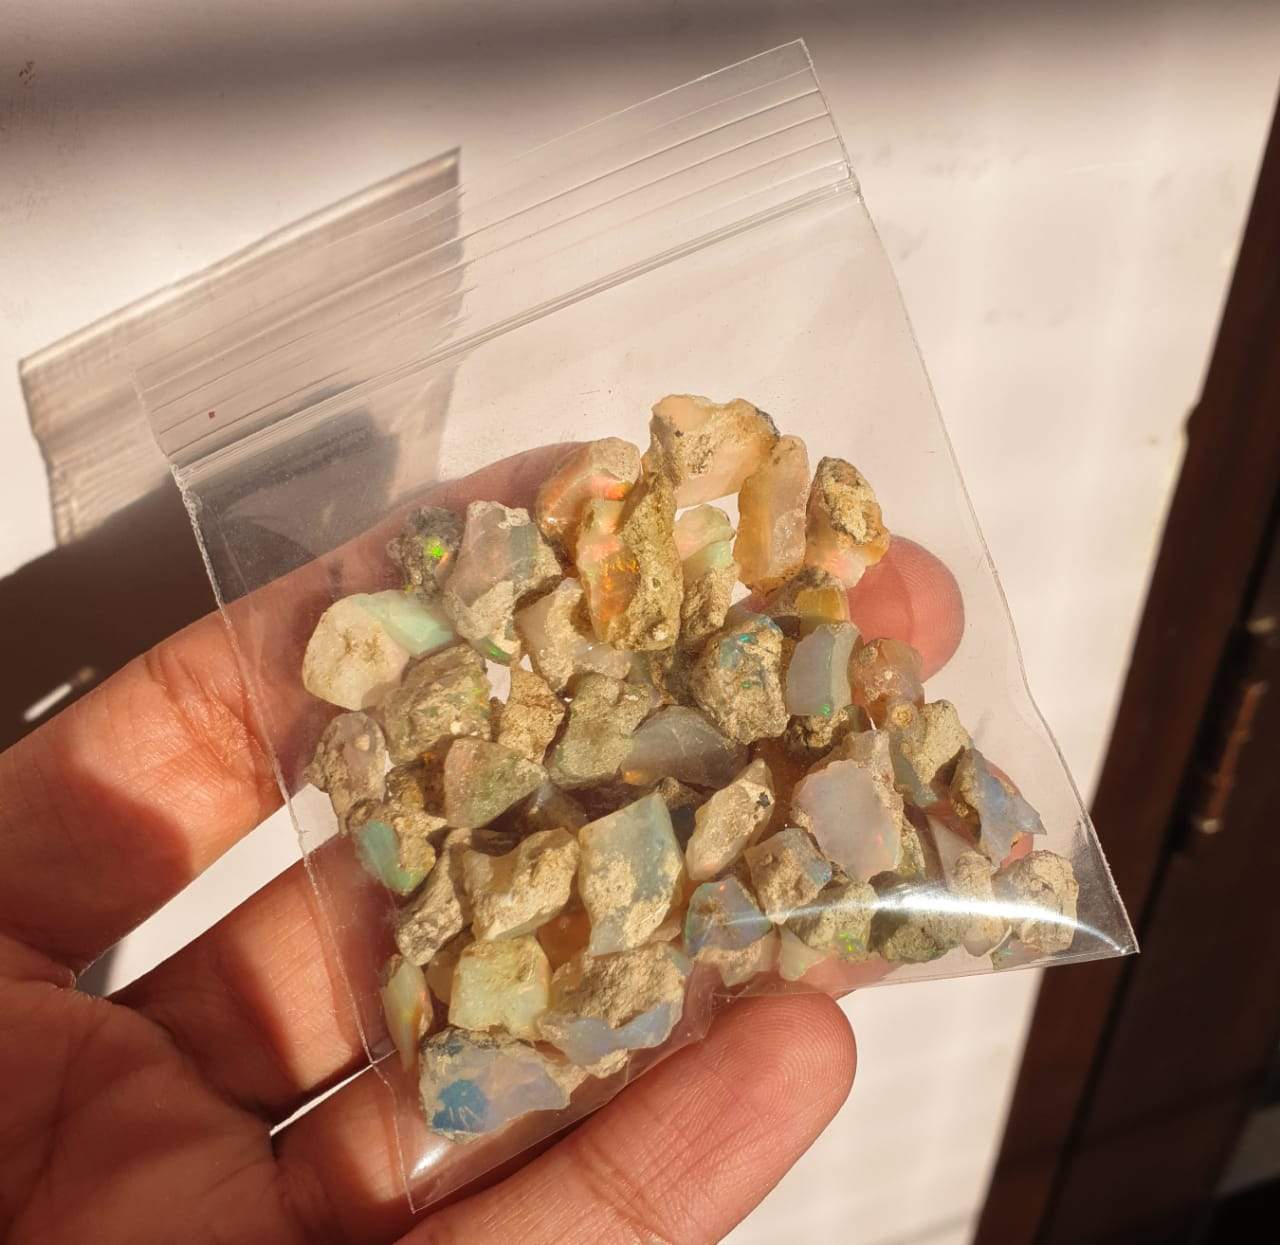 Offer🔥 Welo Opals raw crystals | 7-14mm sizes | 40 Pcs Parcel - The LabradoriteKing